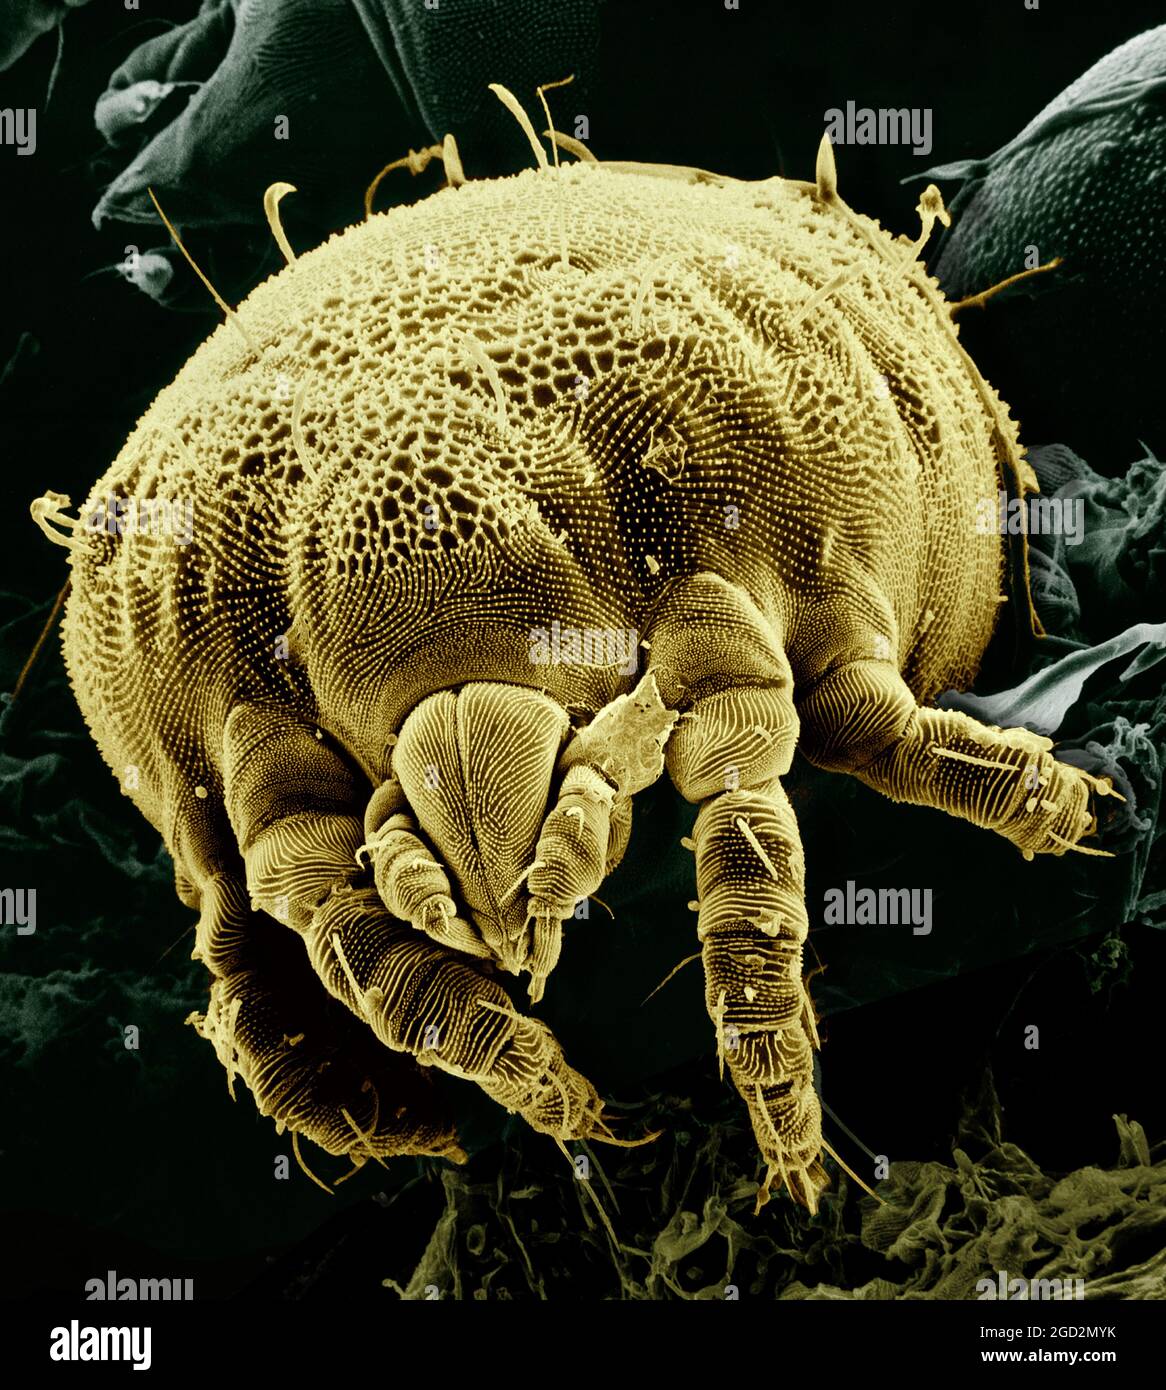 A yellow mite, Lorryia formosa, commonly found on citrus plants, is shown among some fungi. False color. Magnified about 850x. ca. 22 March 2005 Stock Photo